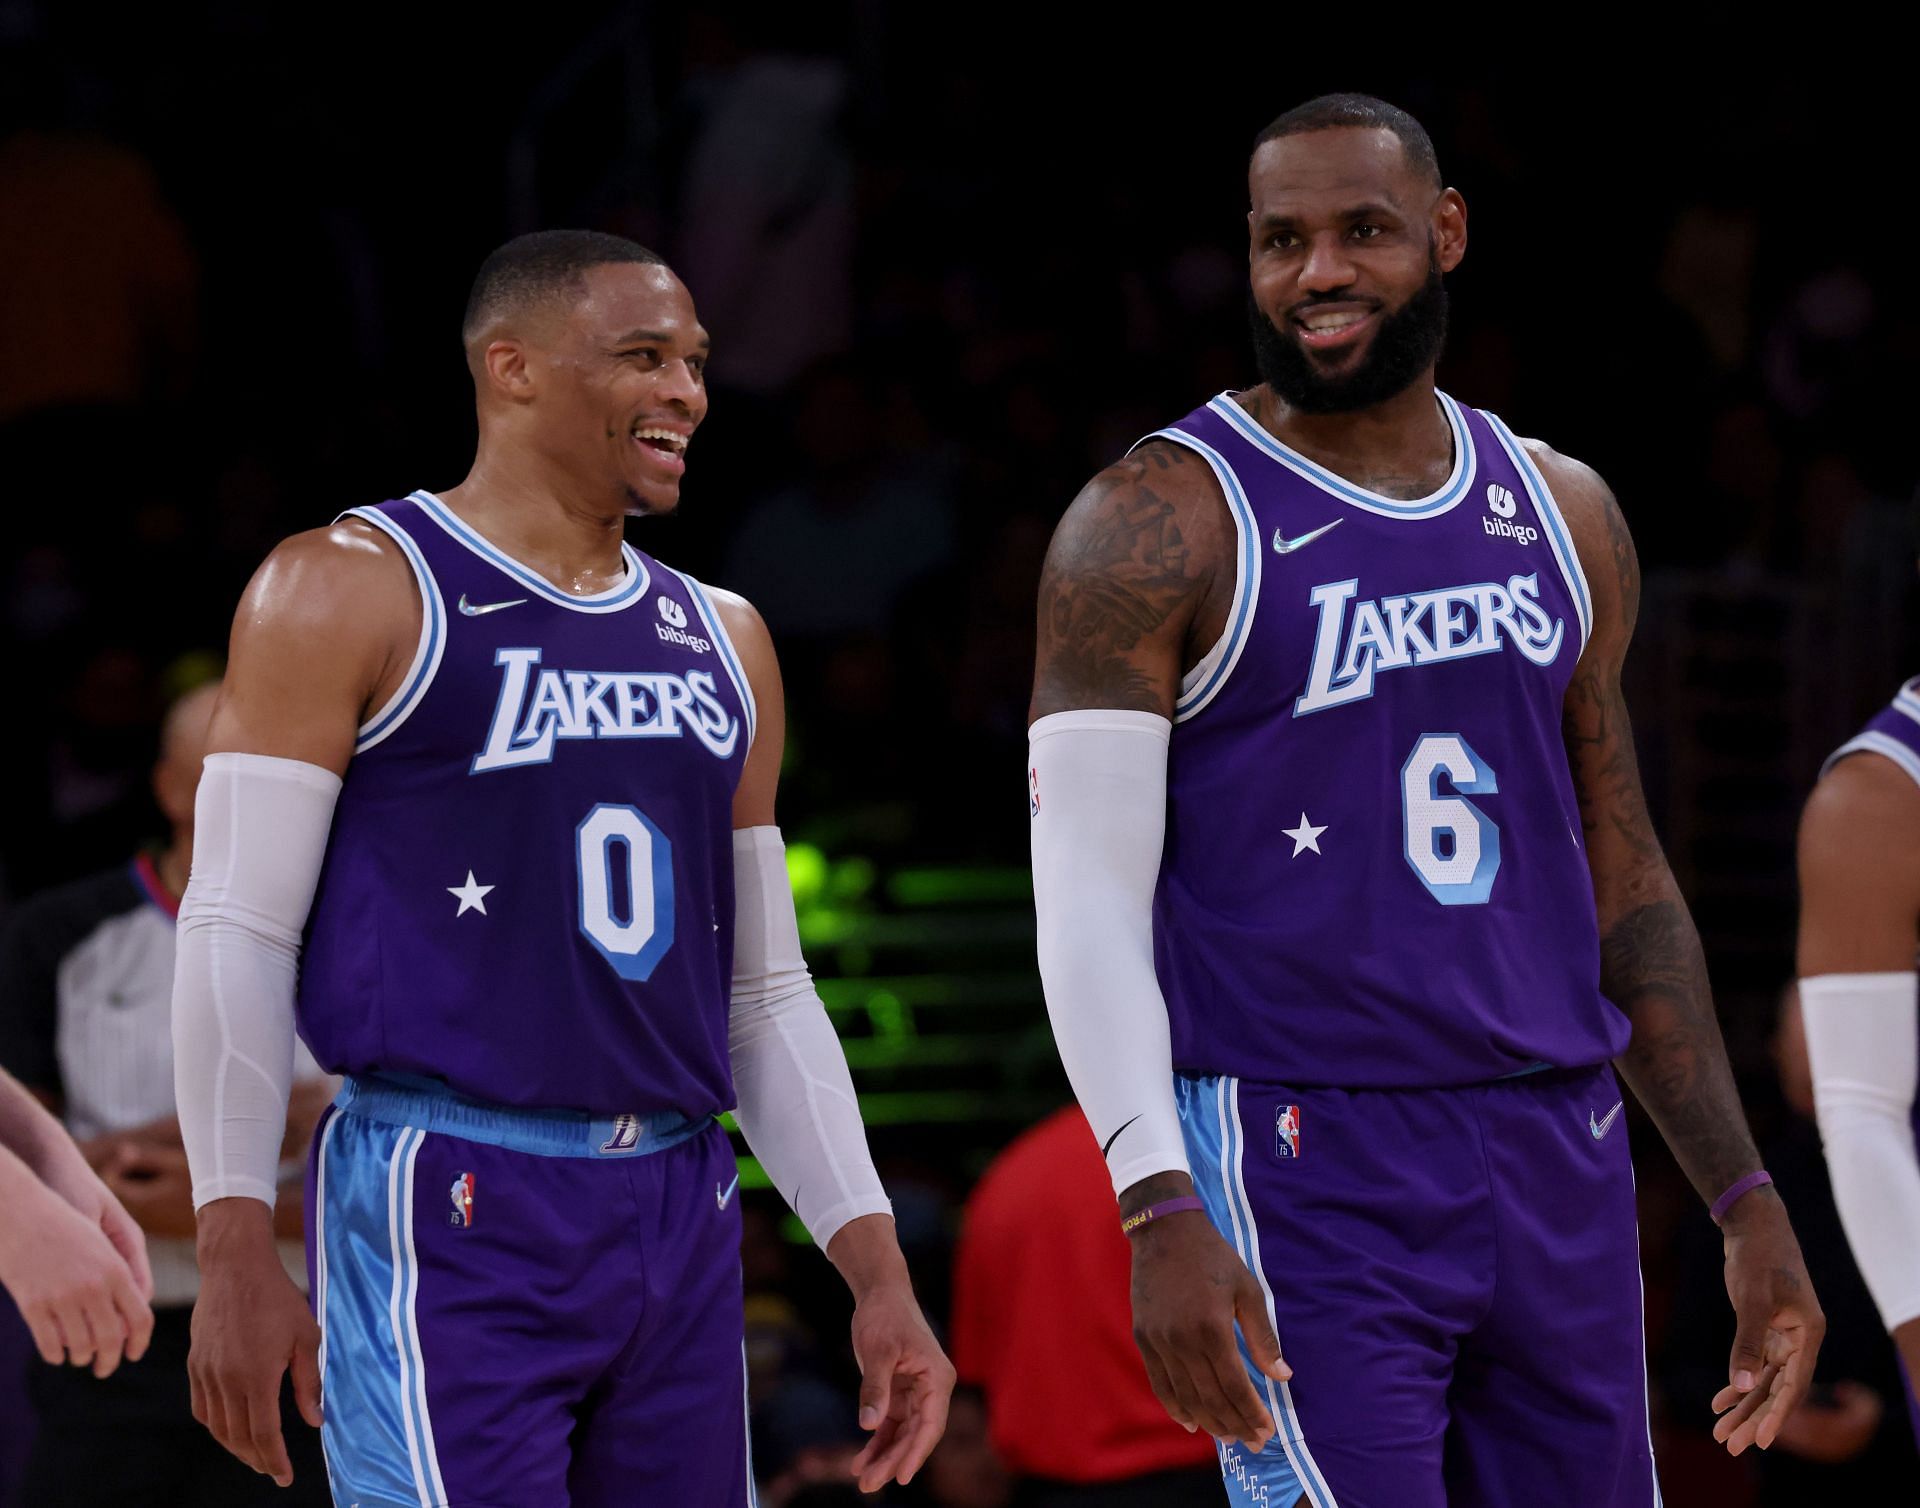 Los Angeles Lakers All-Star teammates Russell Westbrook #0 and LeBron James #6